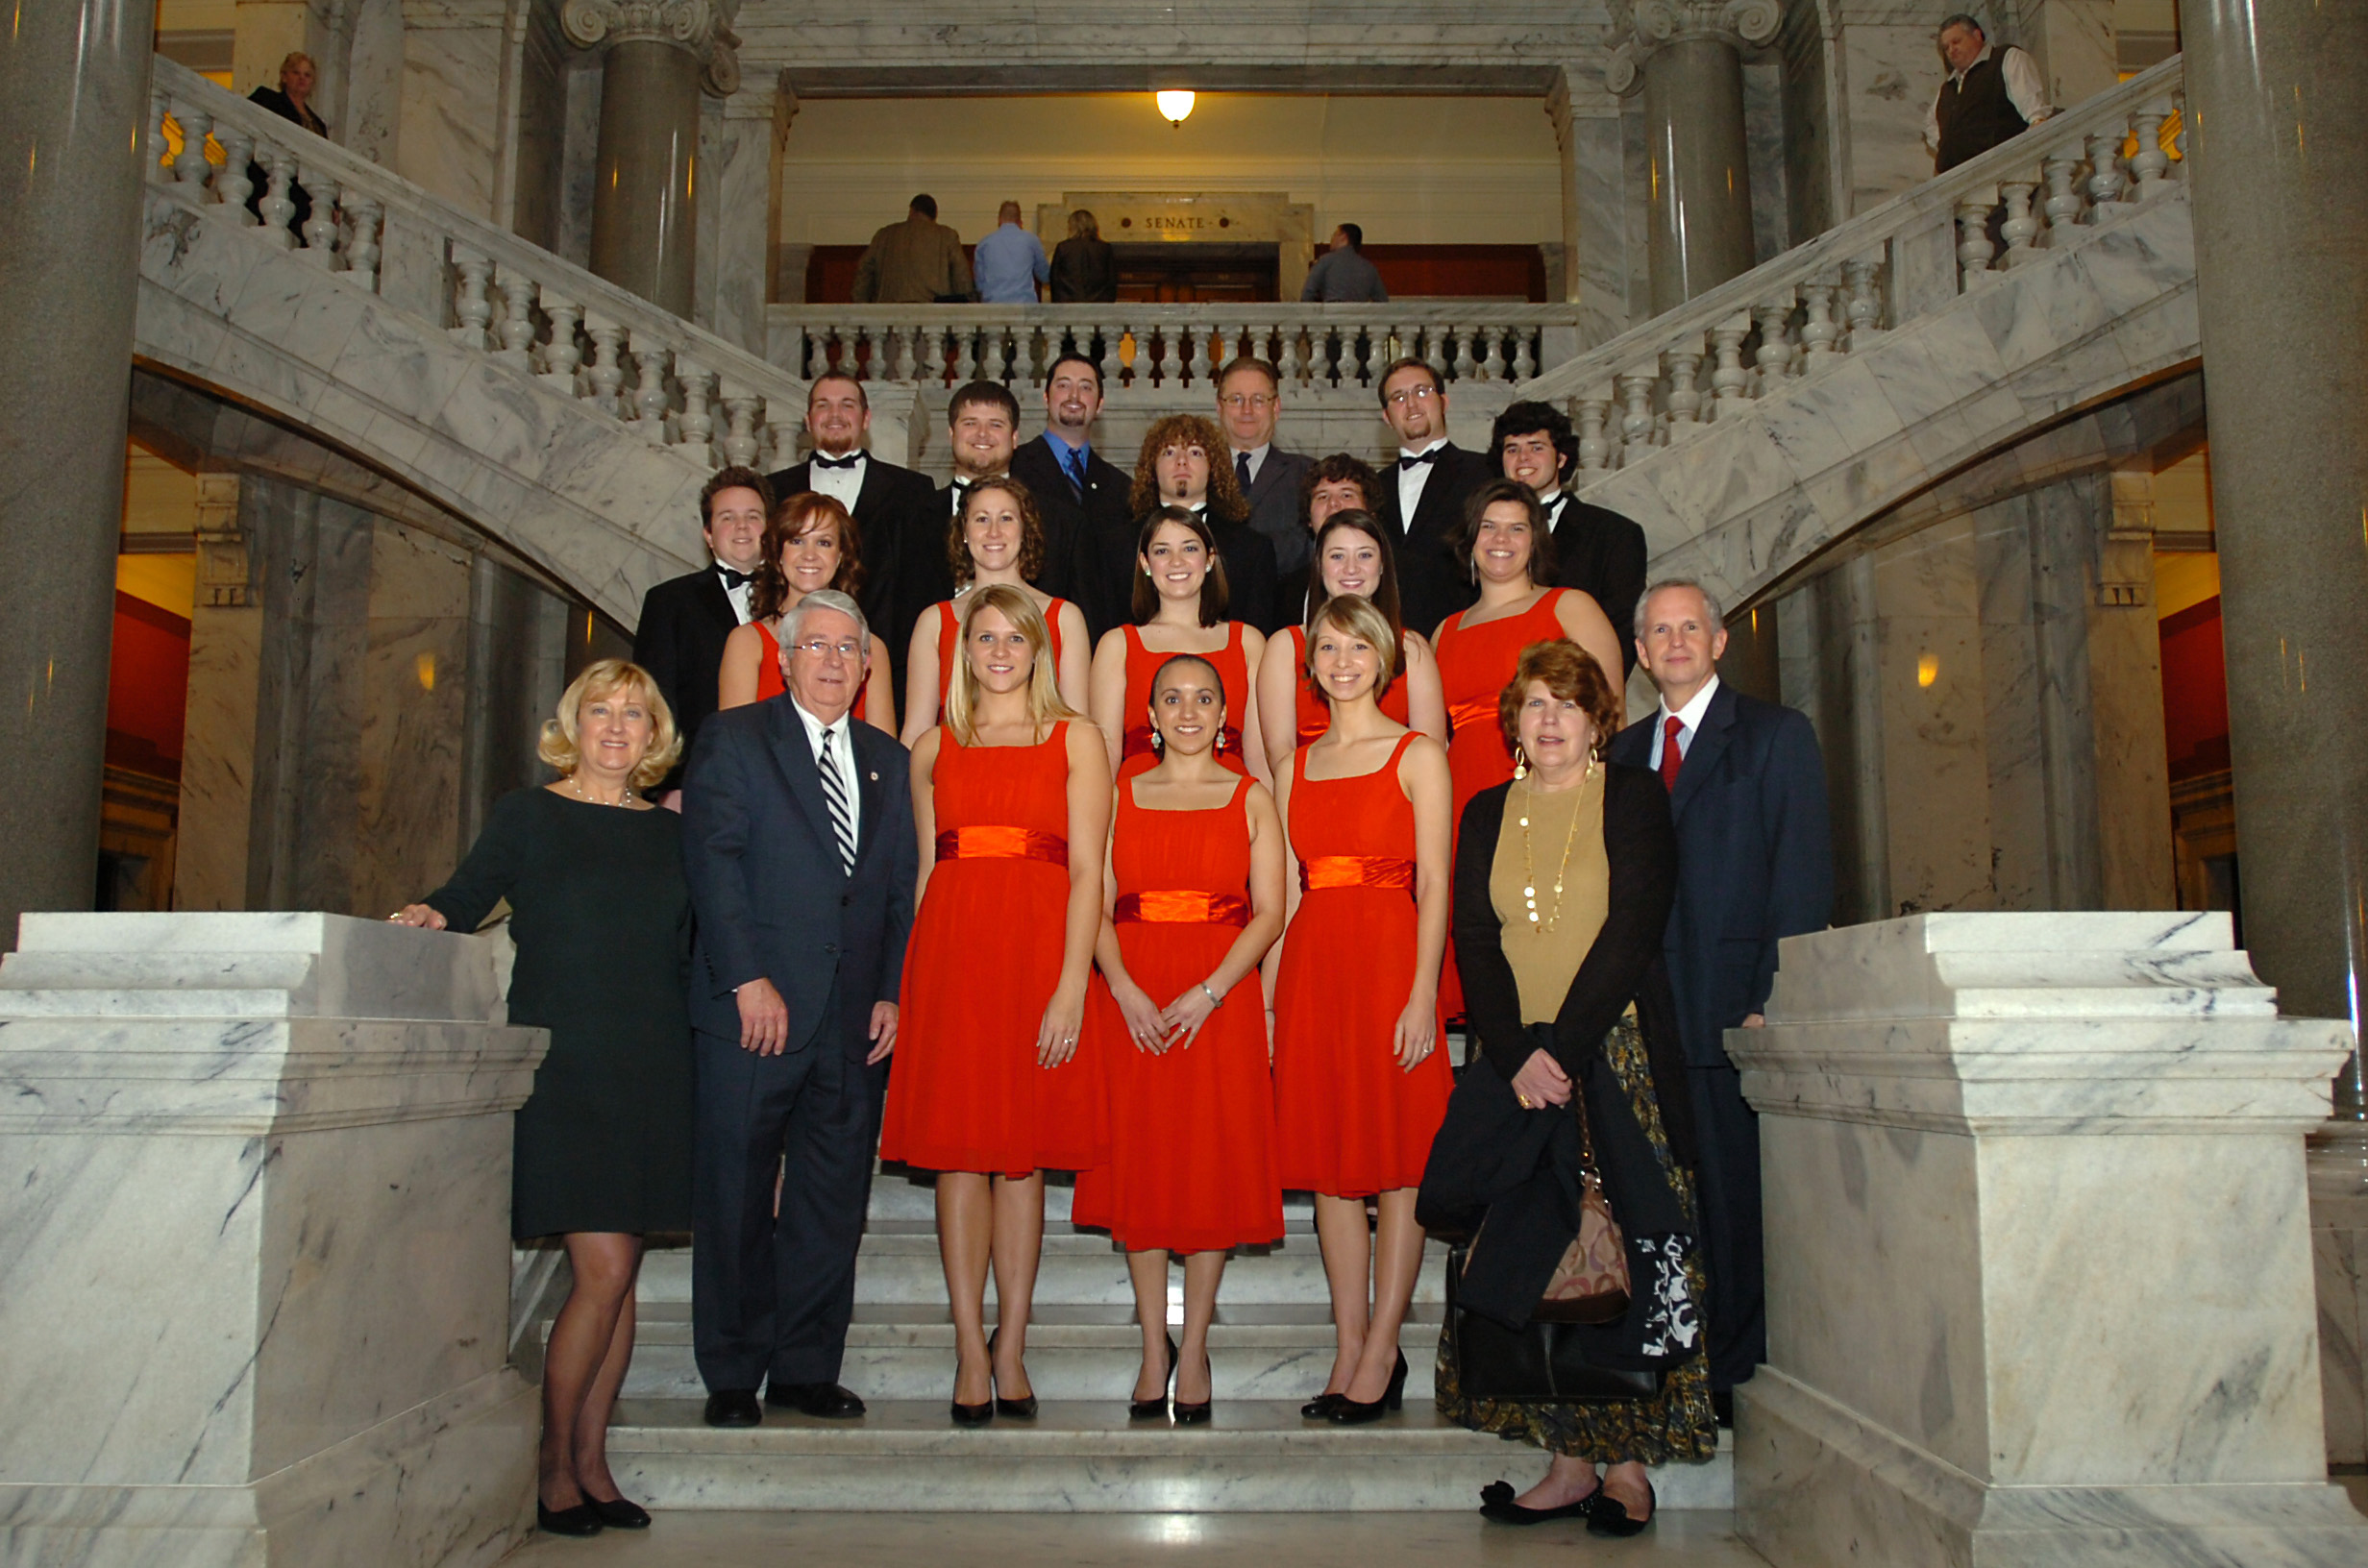 Members of the Campbellsville University Chamber Choir are pictured, in the front row, from left: Dr. Frieda Gebert, associate professor of music at CU, Dr. Ken Winters, president emeritus of Campbellsville University and Kentucky Senator (R) Senate District 1, Megan Massey, MaryGrace Lee, Dana Eberhard, Pam Tennant, and Otto Tennant, vice president for finance and administration at CU. Second row: Cole Torbert, Chanelle Gardner, Sarah Smith, Carmen Drake, Erin Johnson and Rebecca Oliver. Back row: Chris Williams, Allen Brooks, Matt Hodge, Ky. Sen. Jimmy Higdon, (R) District 14; Jonathan McCoy and Tim Howe.